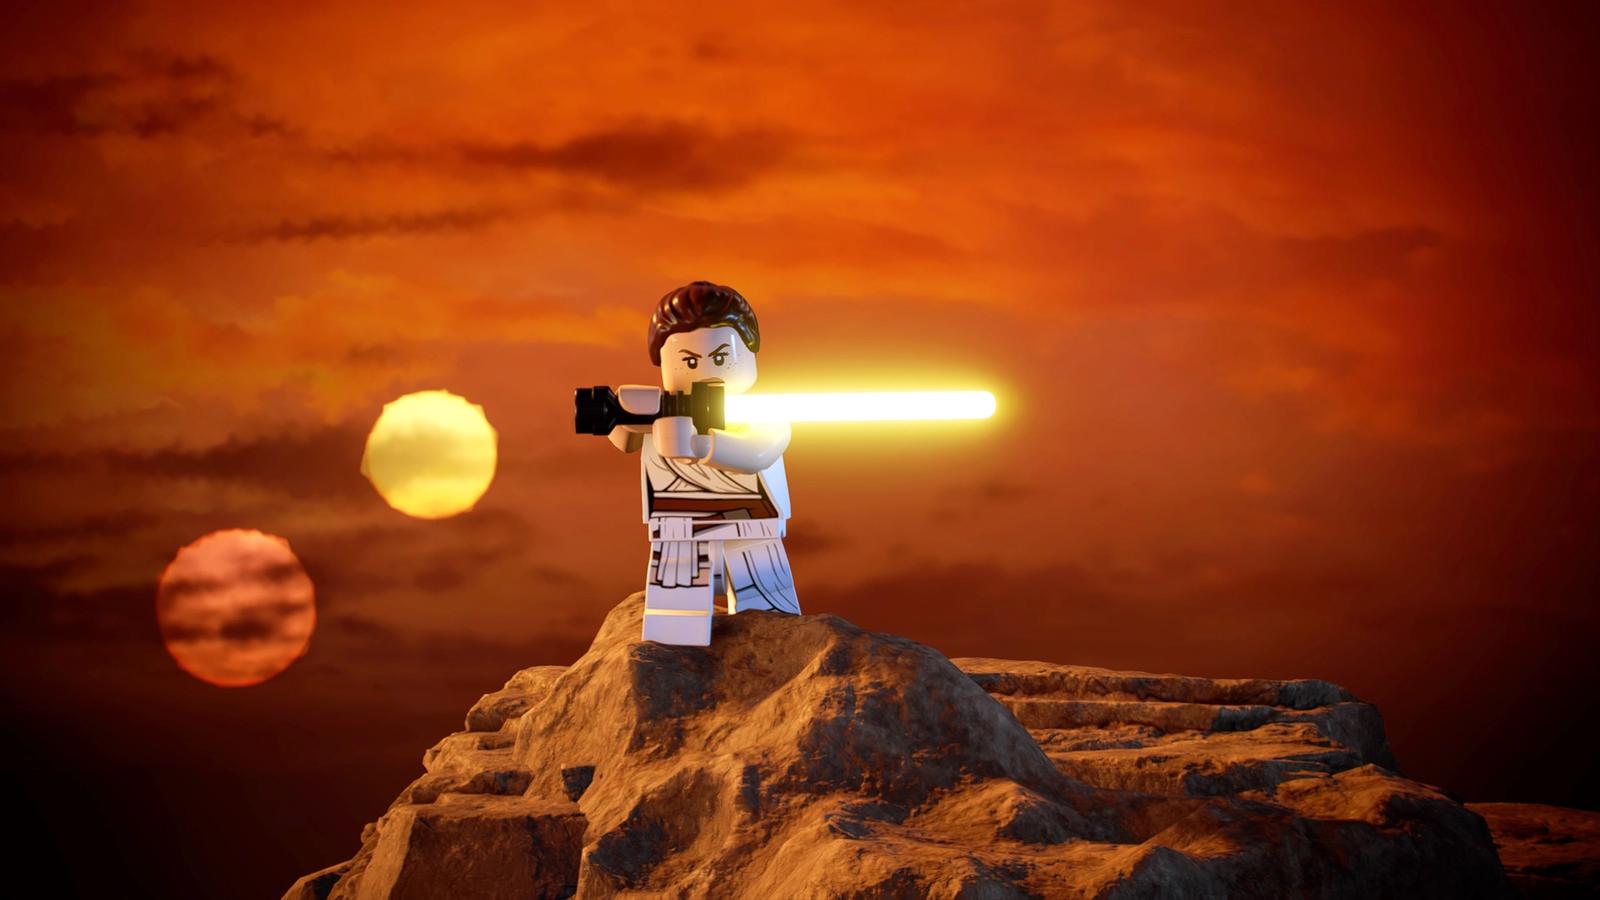 Rey from Lego Star Wars holding up her lightsaber in front of a sunset.